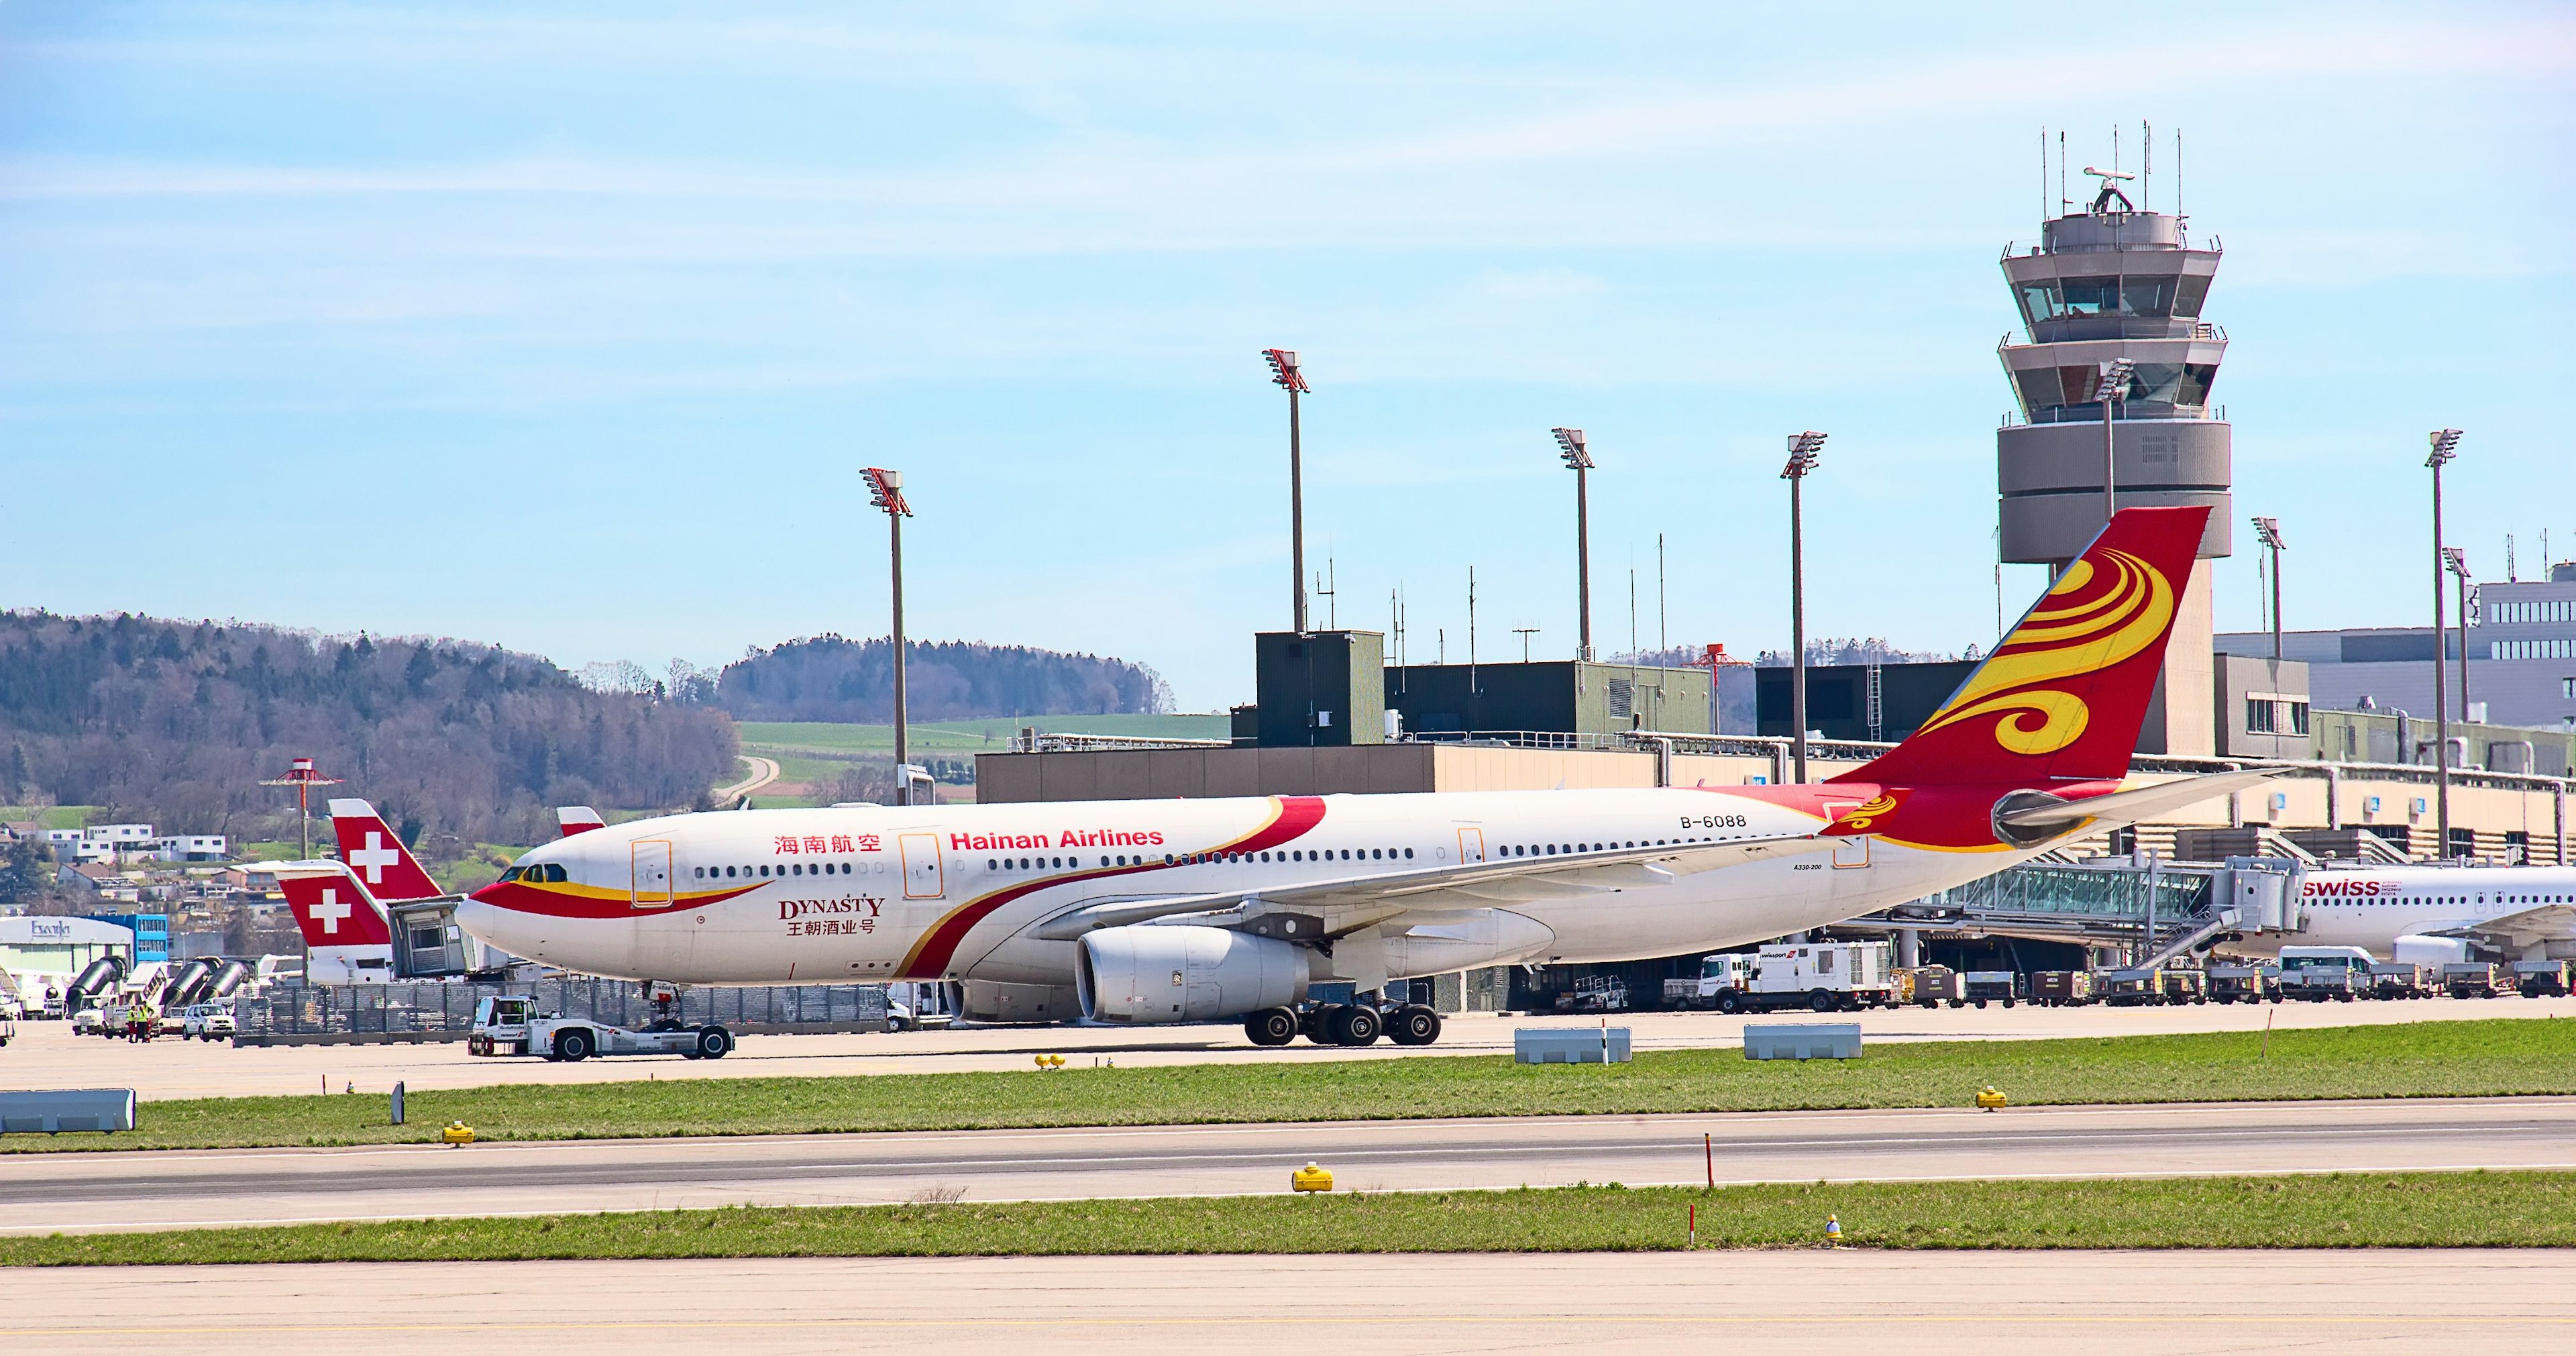 Hainan Airlines is betting on lower-tier cities to fuel the growth of its international operations. (Fedor Selivanov/Shutterstock)